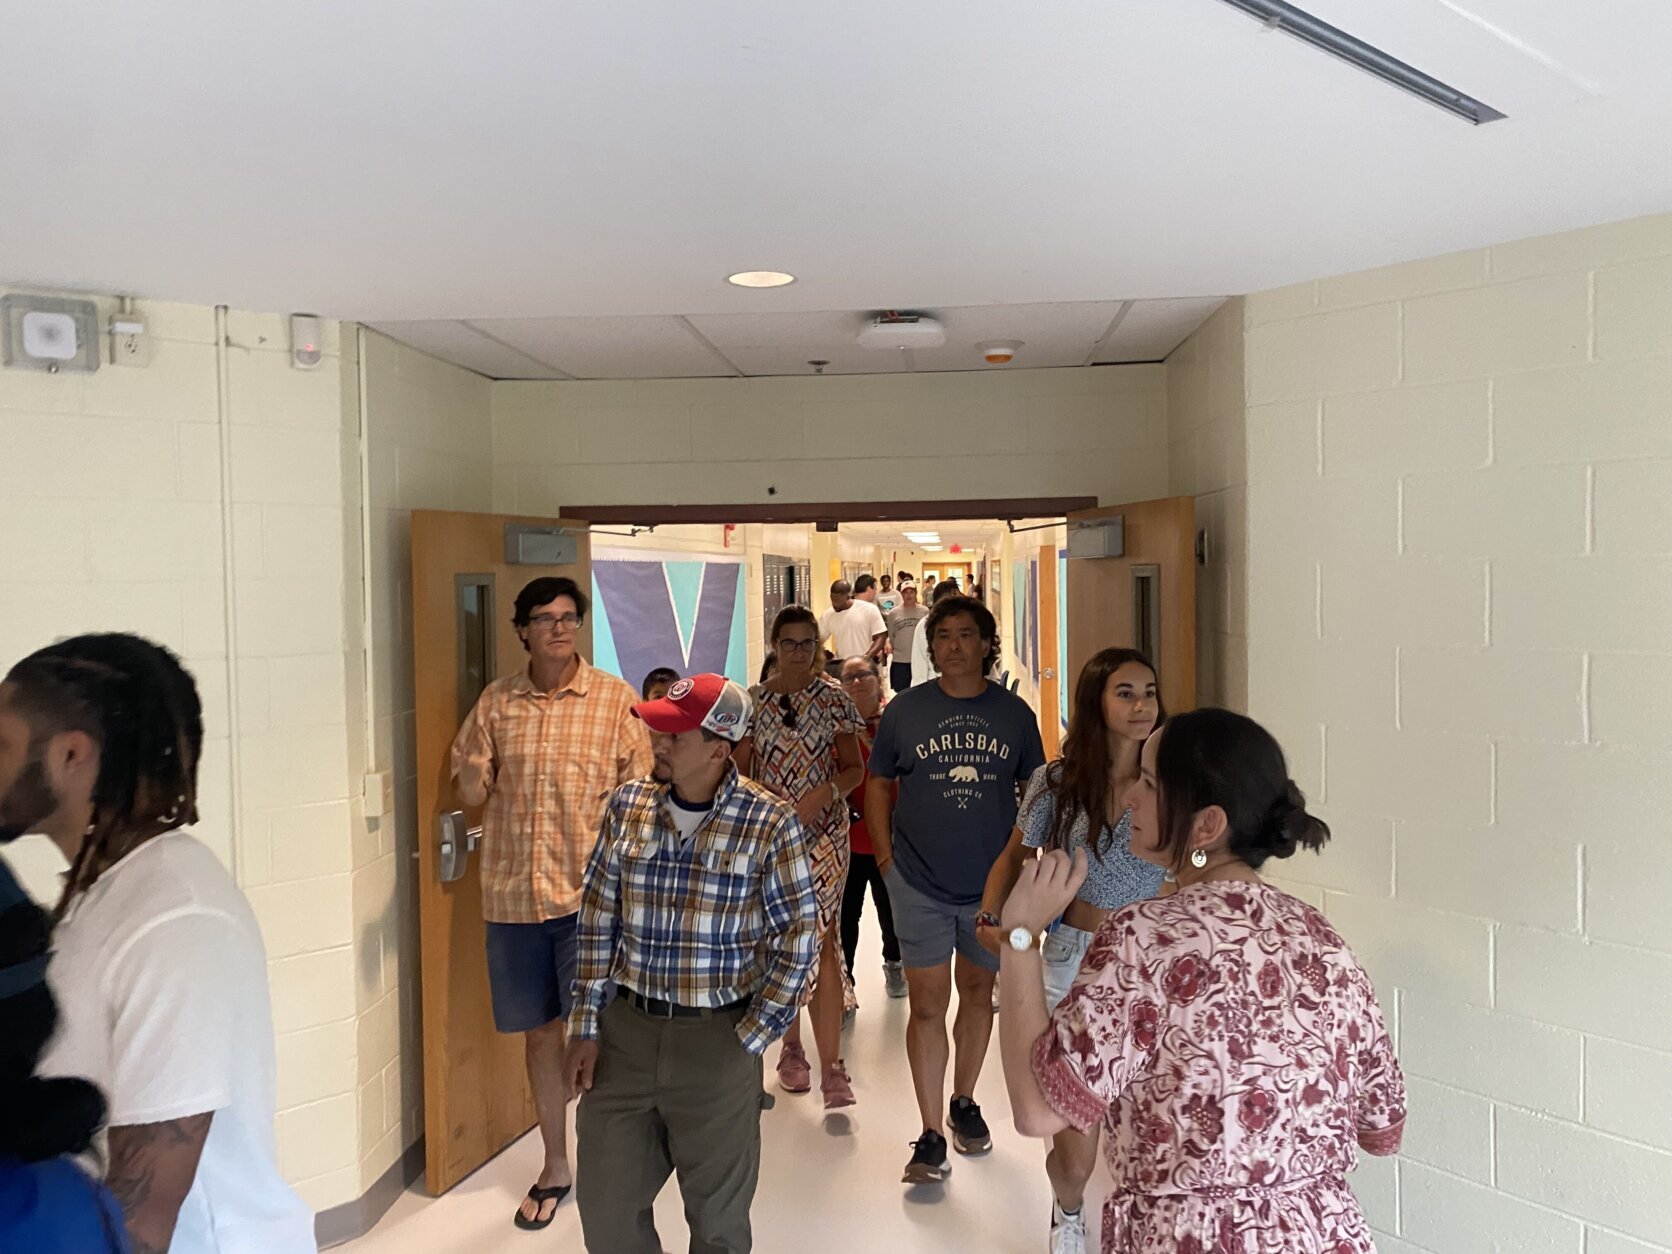 MacArthur High School — D.C.'s newest high school and the first to be built since 1972 — opened its doors to student and parents for a sneak peek ahead of the first day of classes. (WTOP/Luke Lukert) 